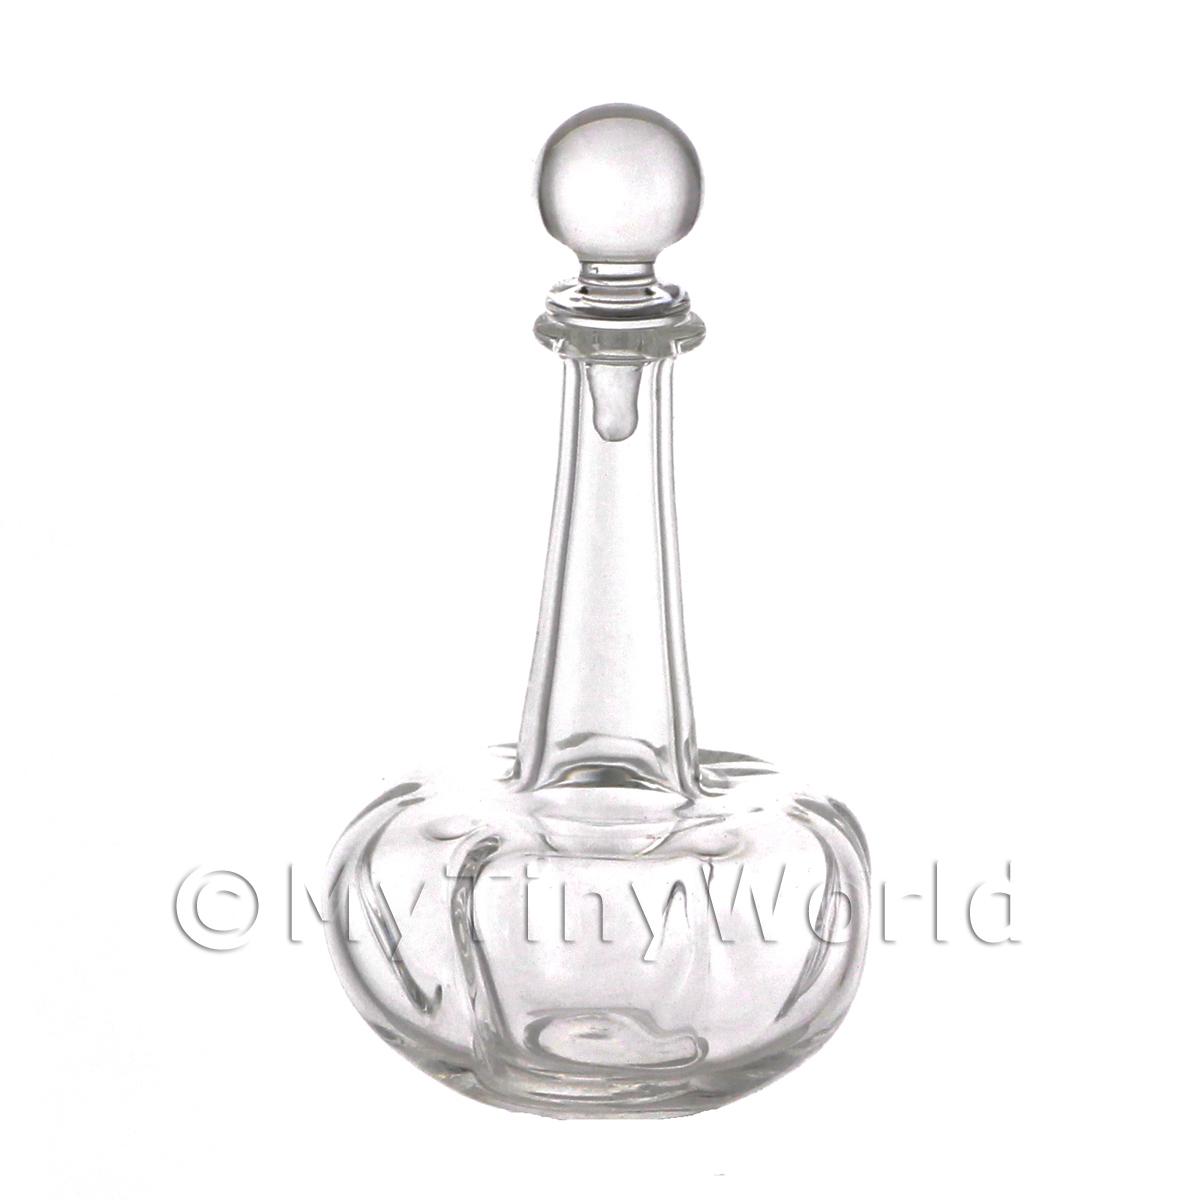 Details about   1:12 Scale Real Glass Decanter With A Green Tinted Base Tumdee Dolls House GDP 